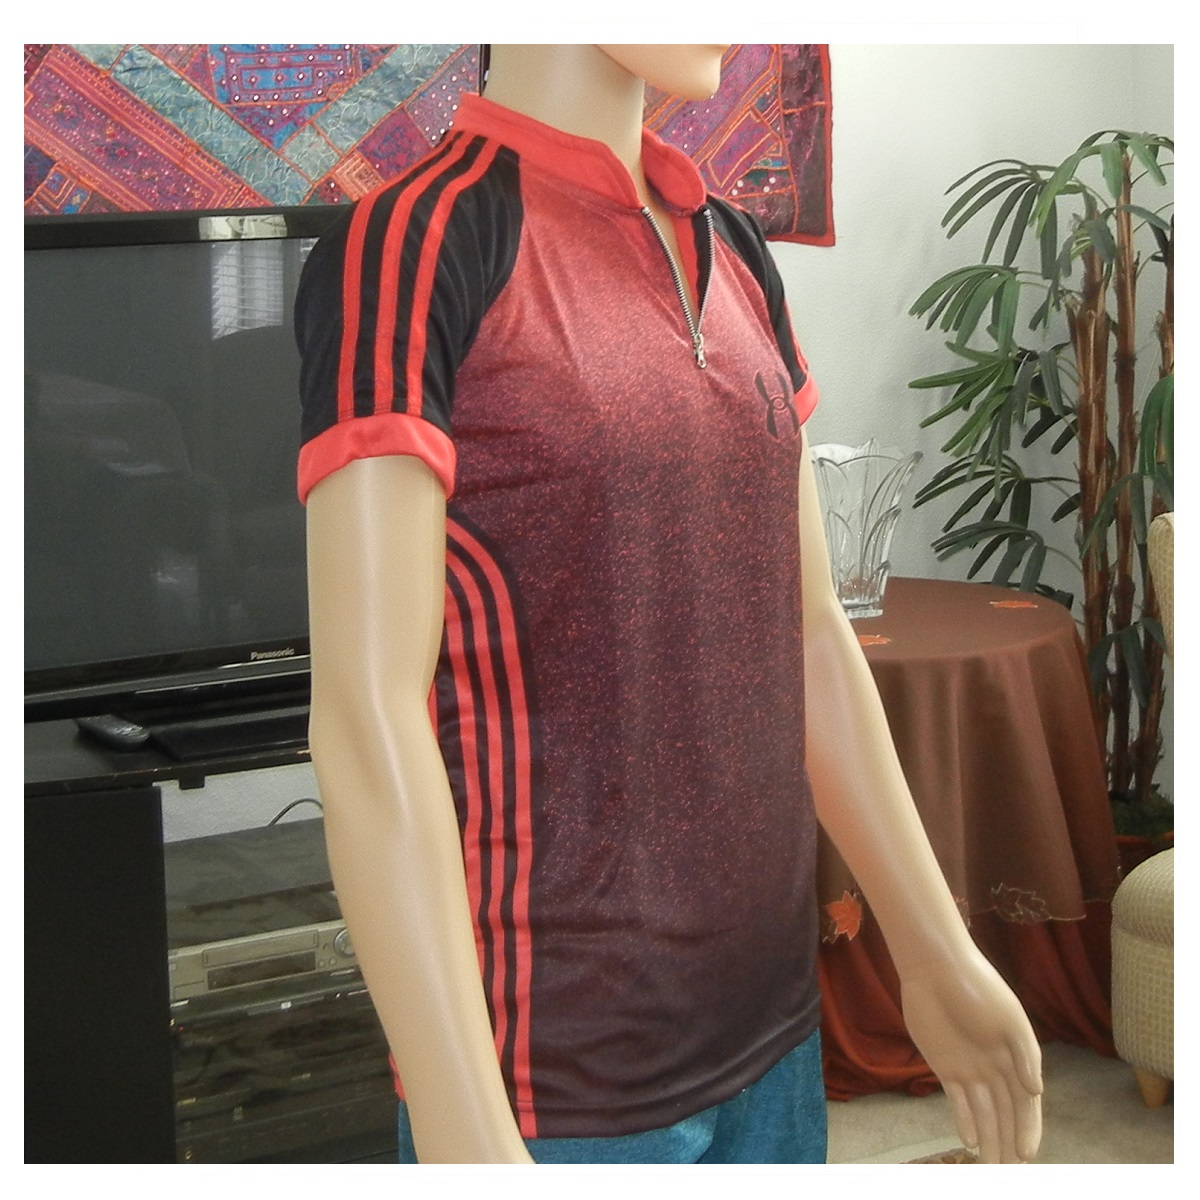 Sublimated T-Shirt for Men, Elegant Colorful gradient design with Stripes, red and black